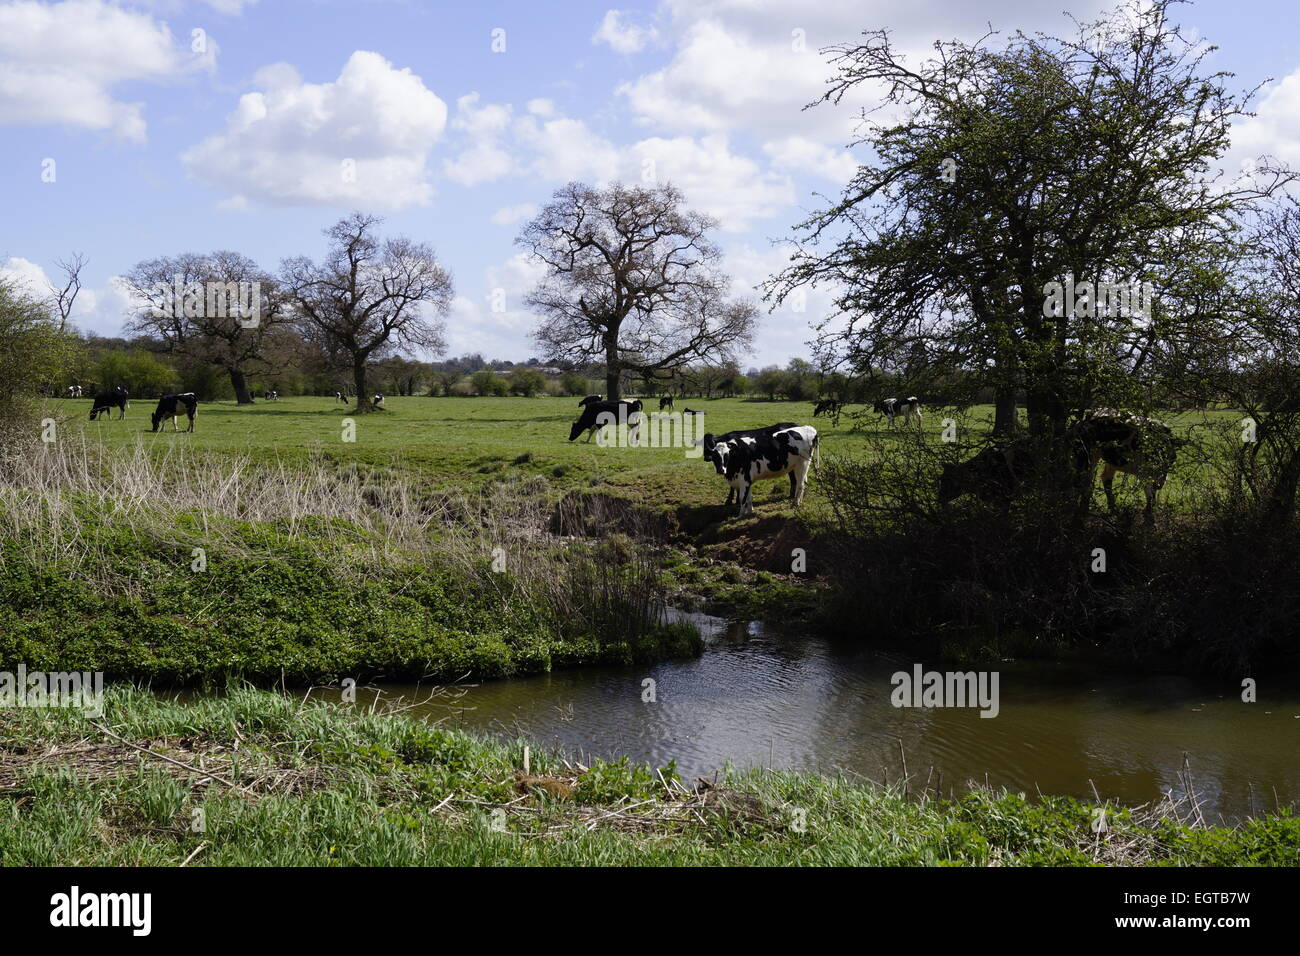 Traditional countryside showing cows grazing next to water under trees, blue sky. Stock Photo